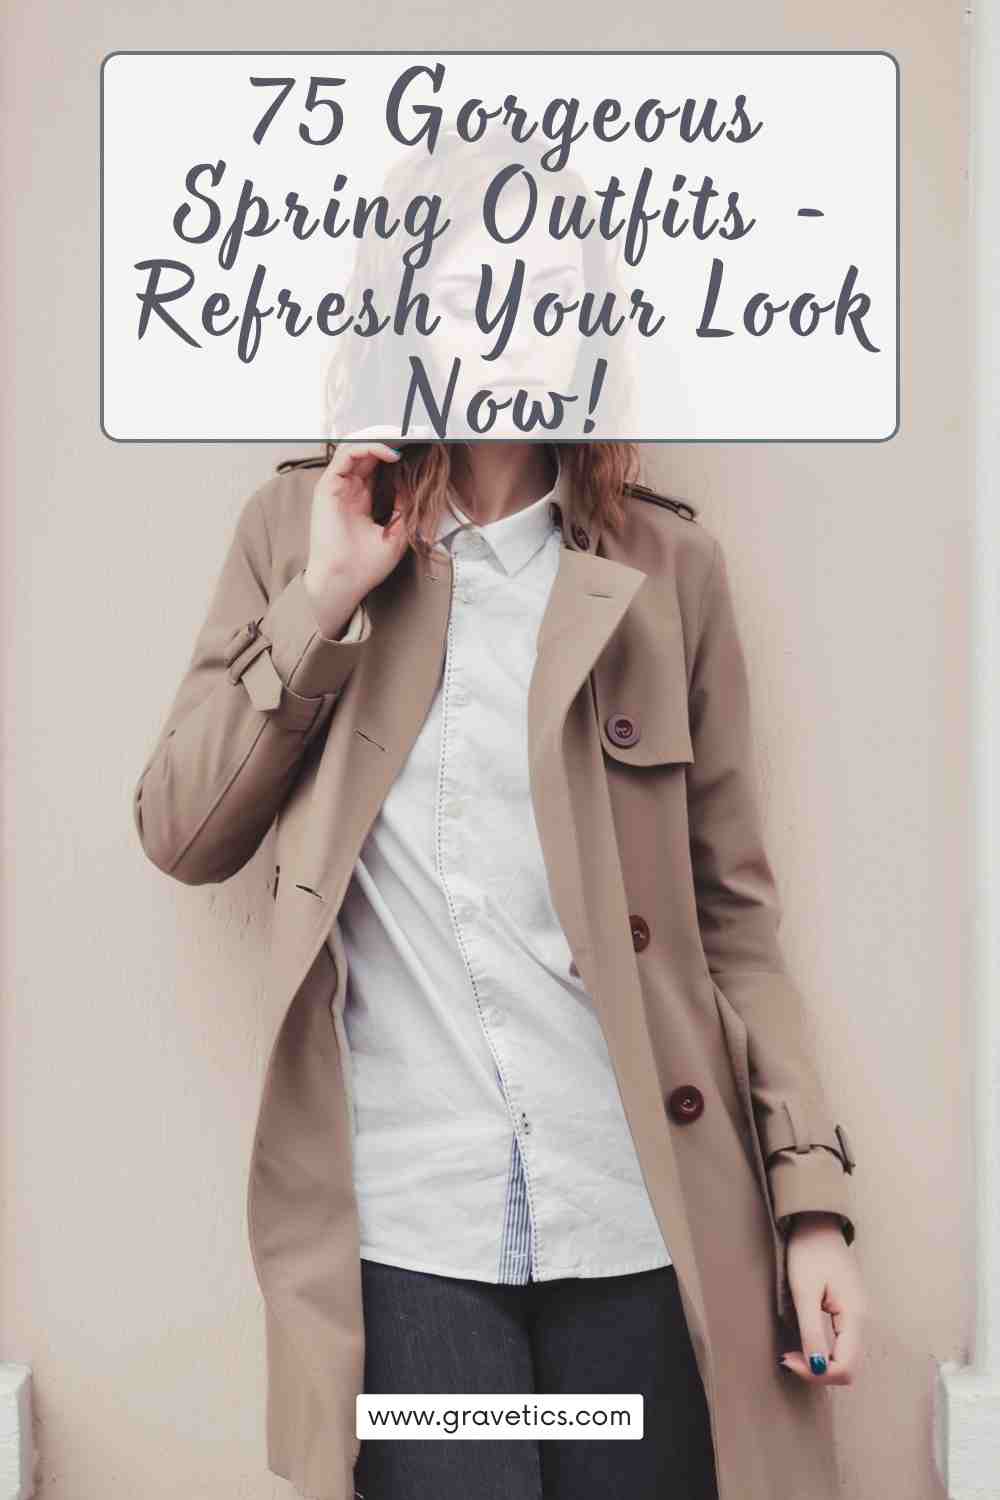 75 Gorgeous Spring Outfits - Refresh Your Look Now!